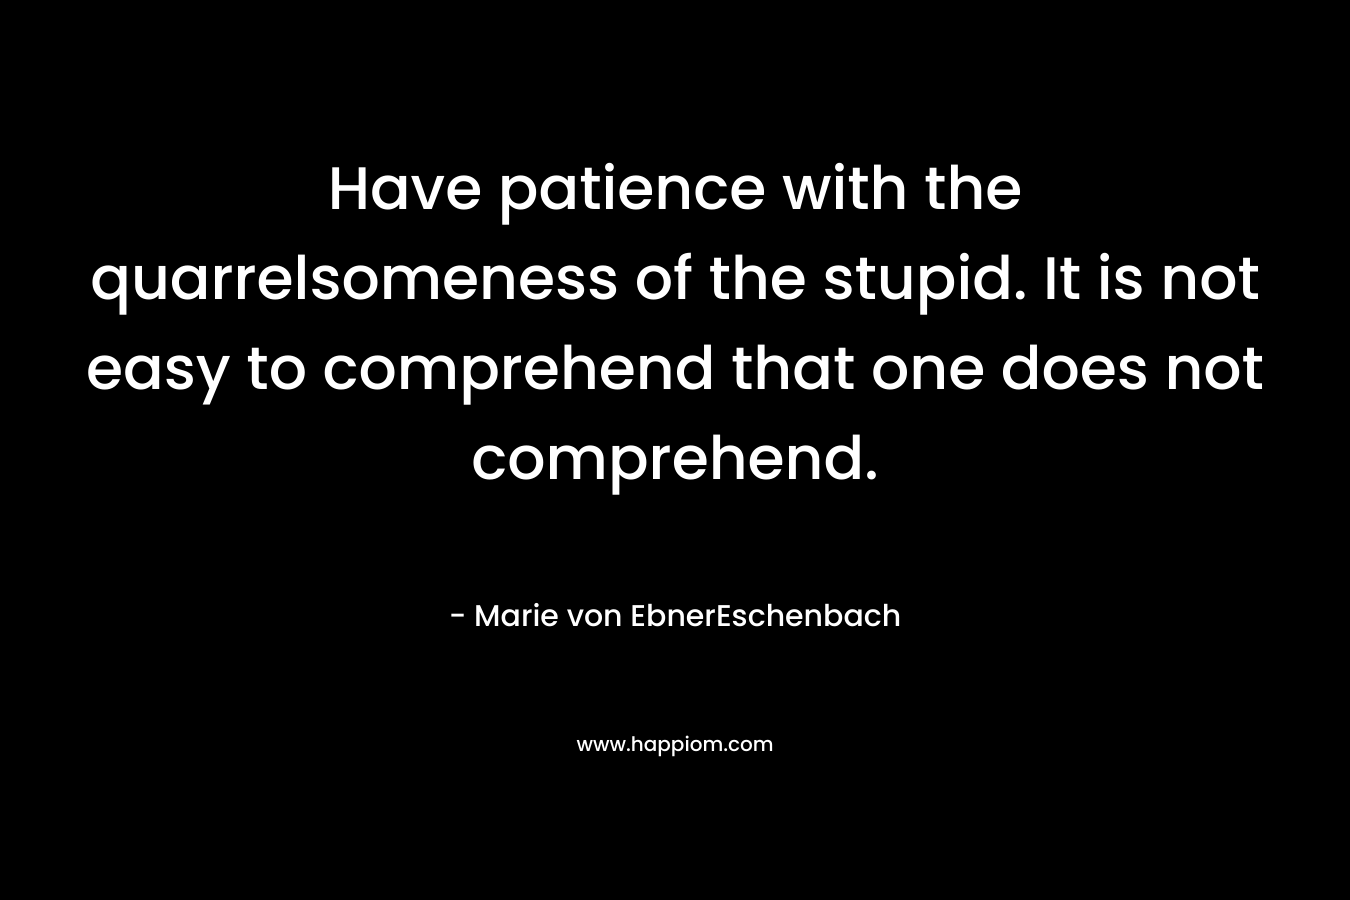 Have patience with the quarrelsomeness of the stupid. It is not easy to comprehend that one does not comprehend. – Marie von EbnerEschenbach